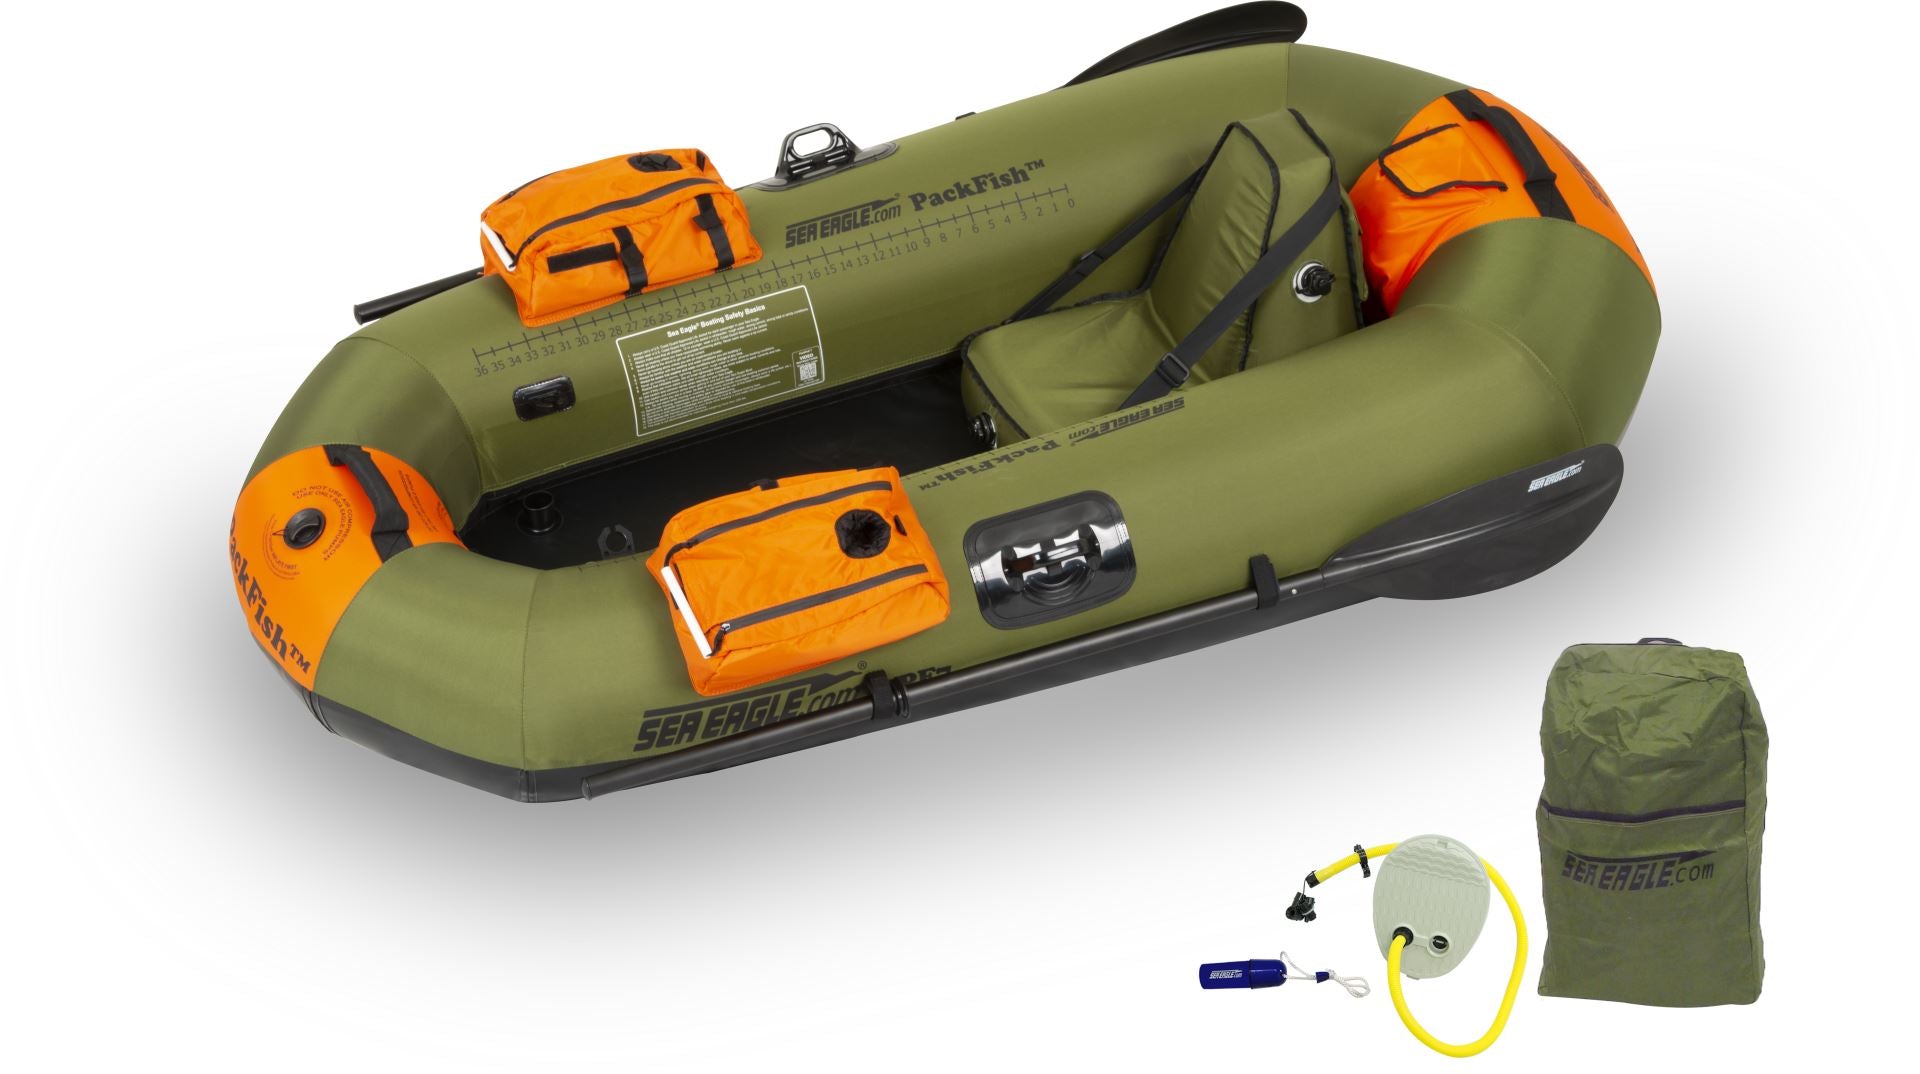 PackFish7™ Inflatable Fishing Boat Deluxe Fishing Package by SeaEagle —  YBLGoods